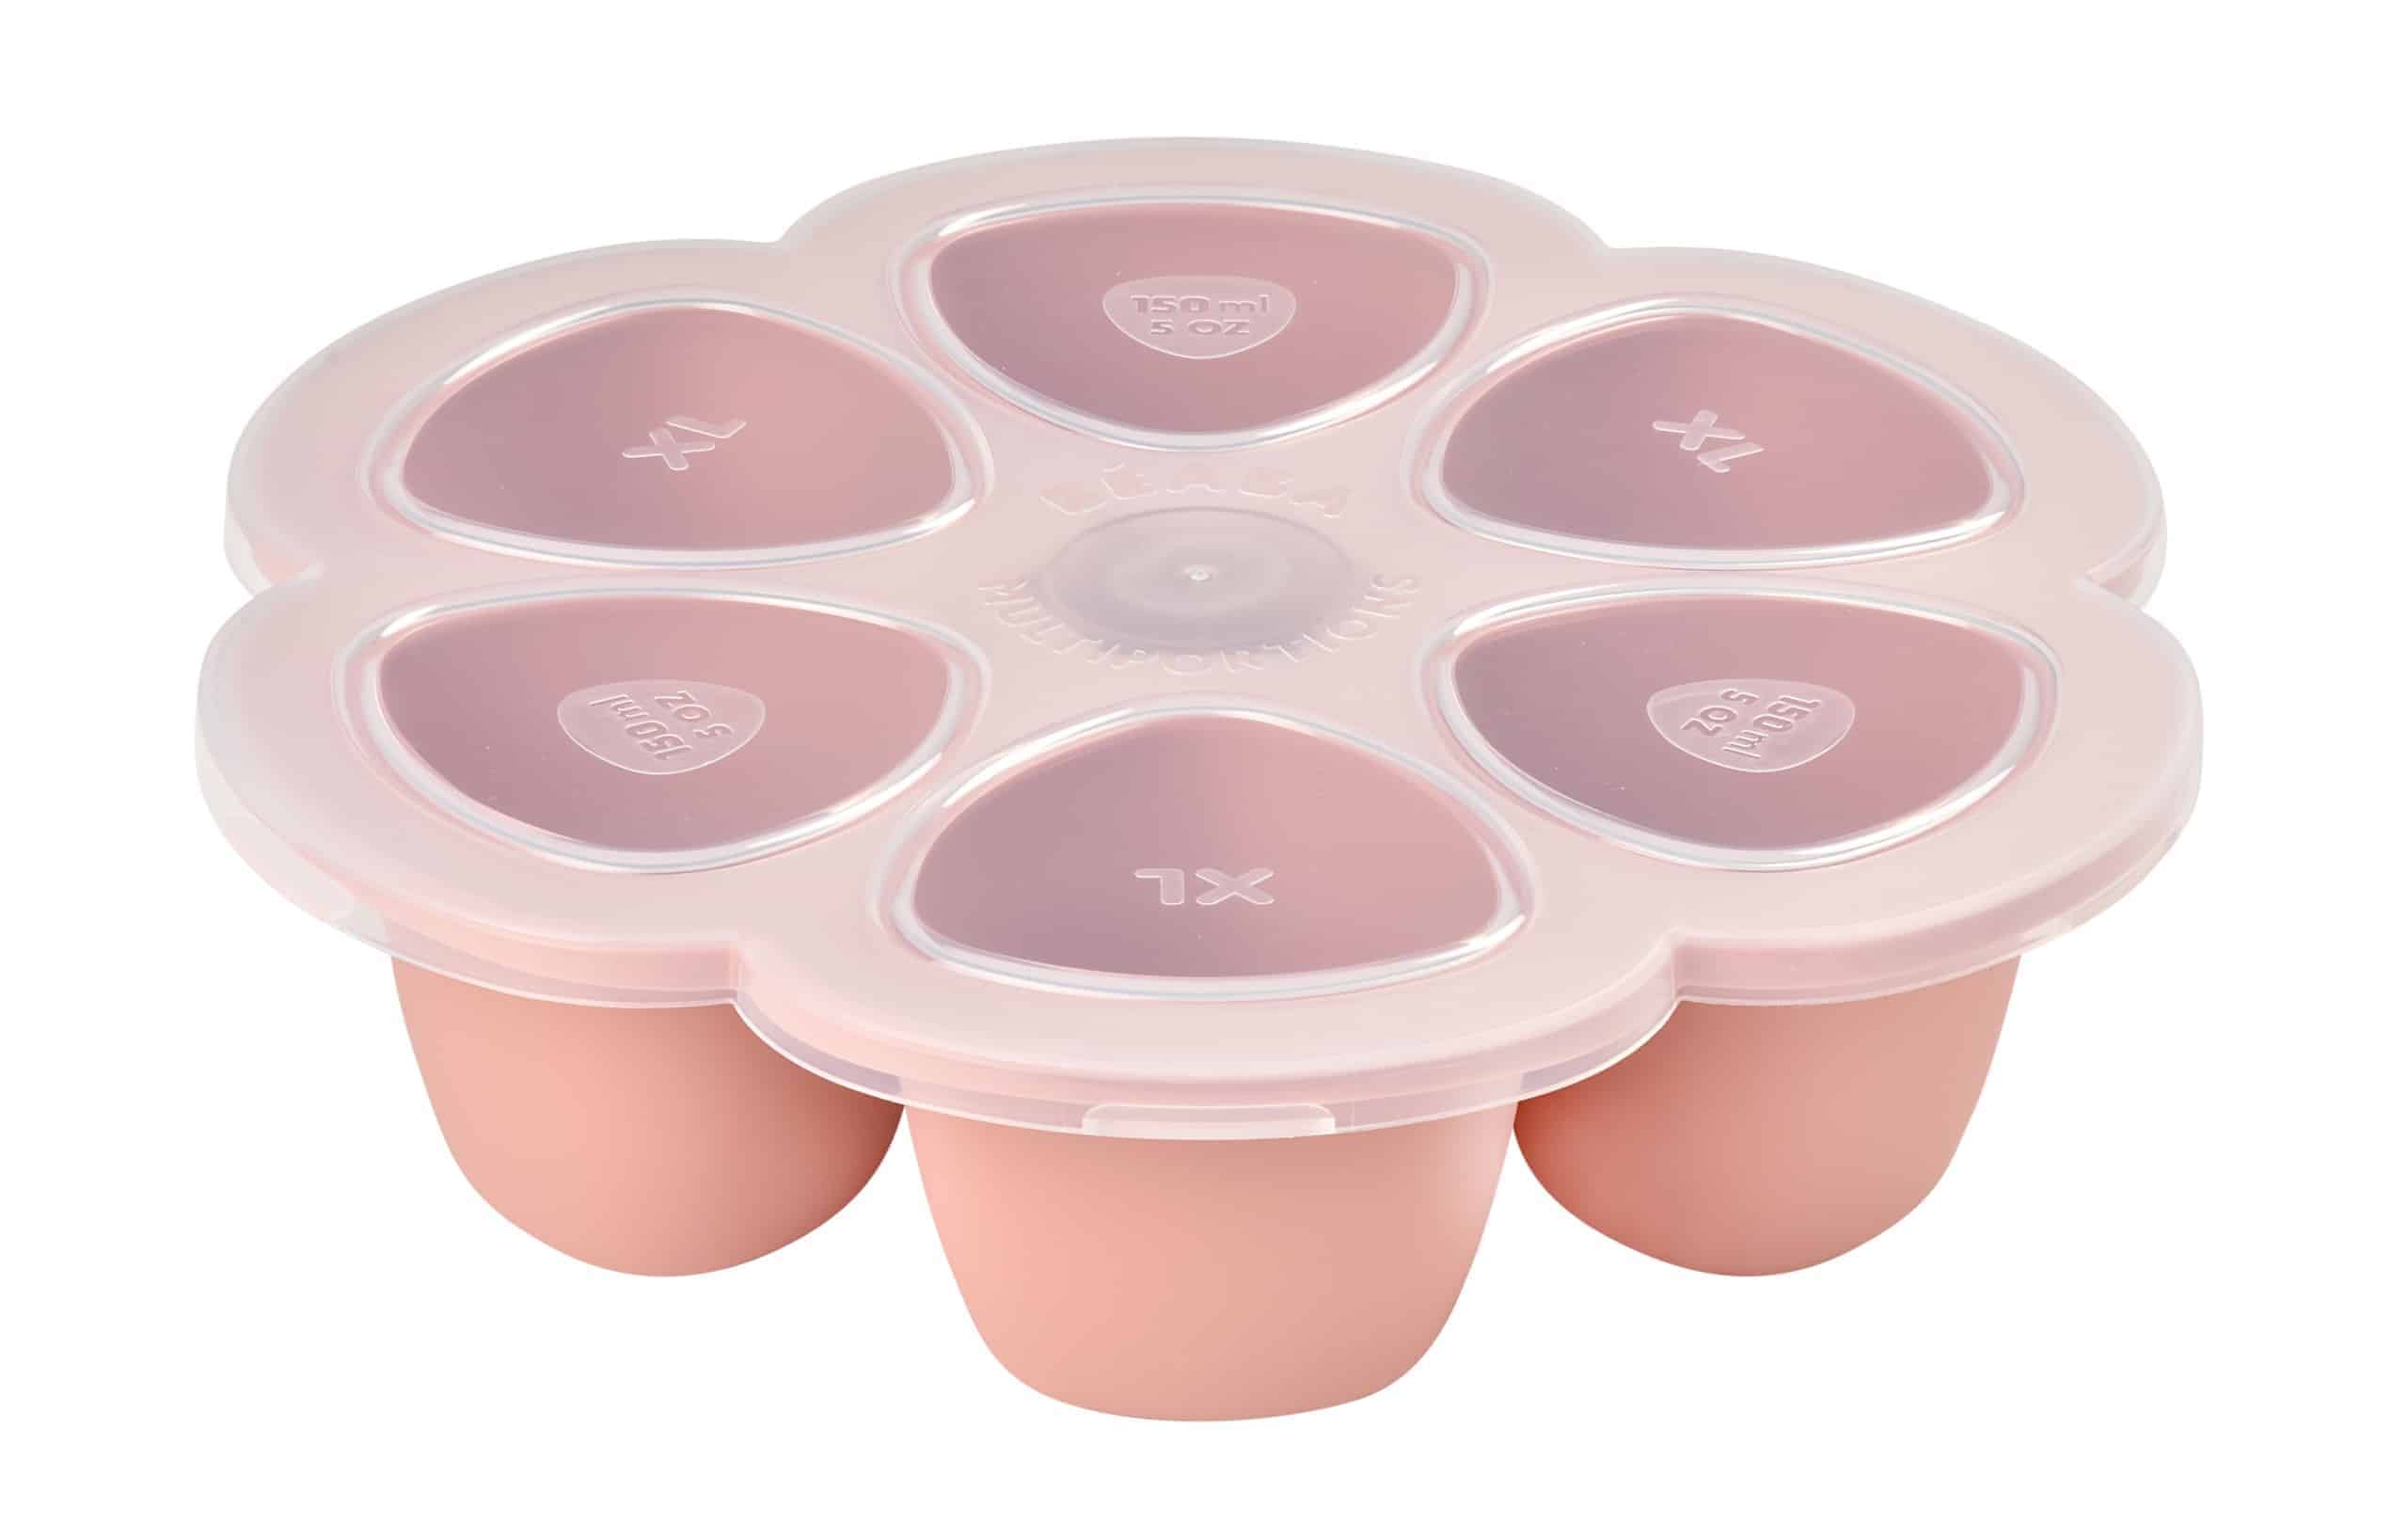 Beaba multiportions in rose with lid on 5oz